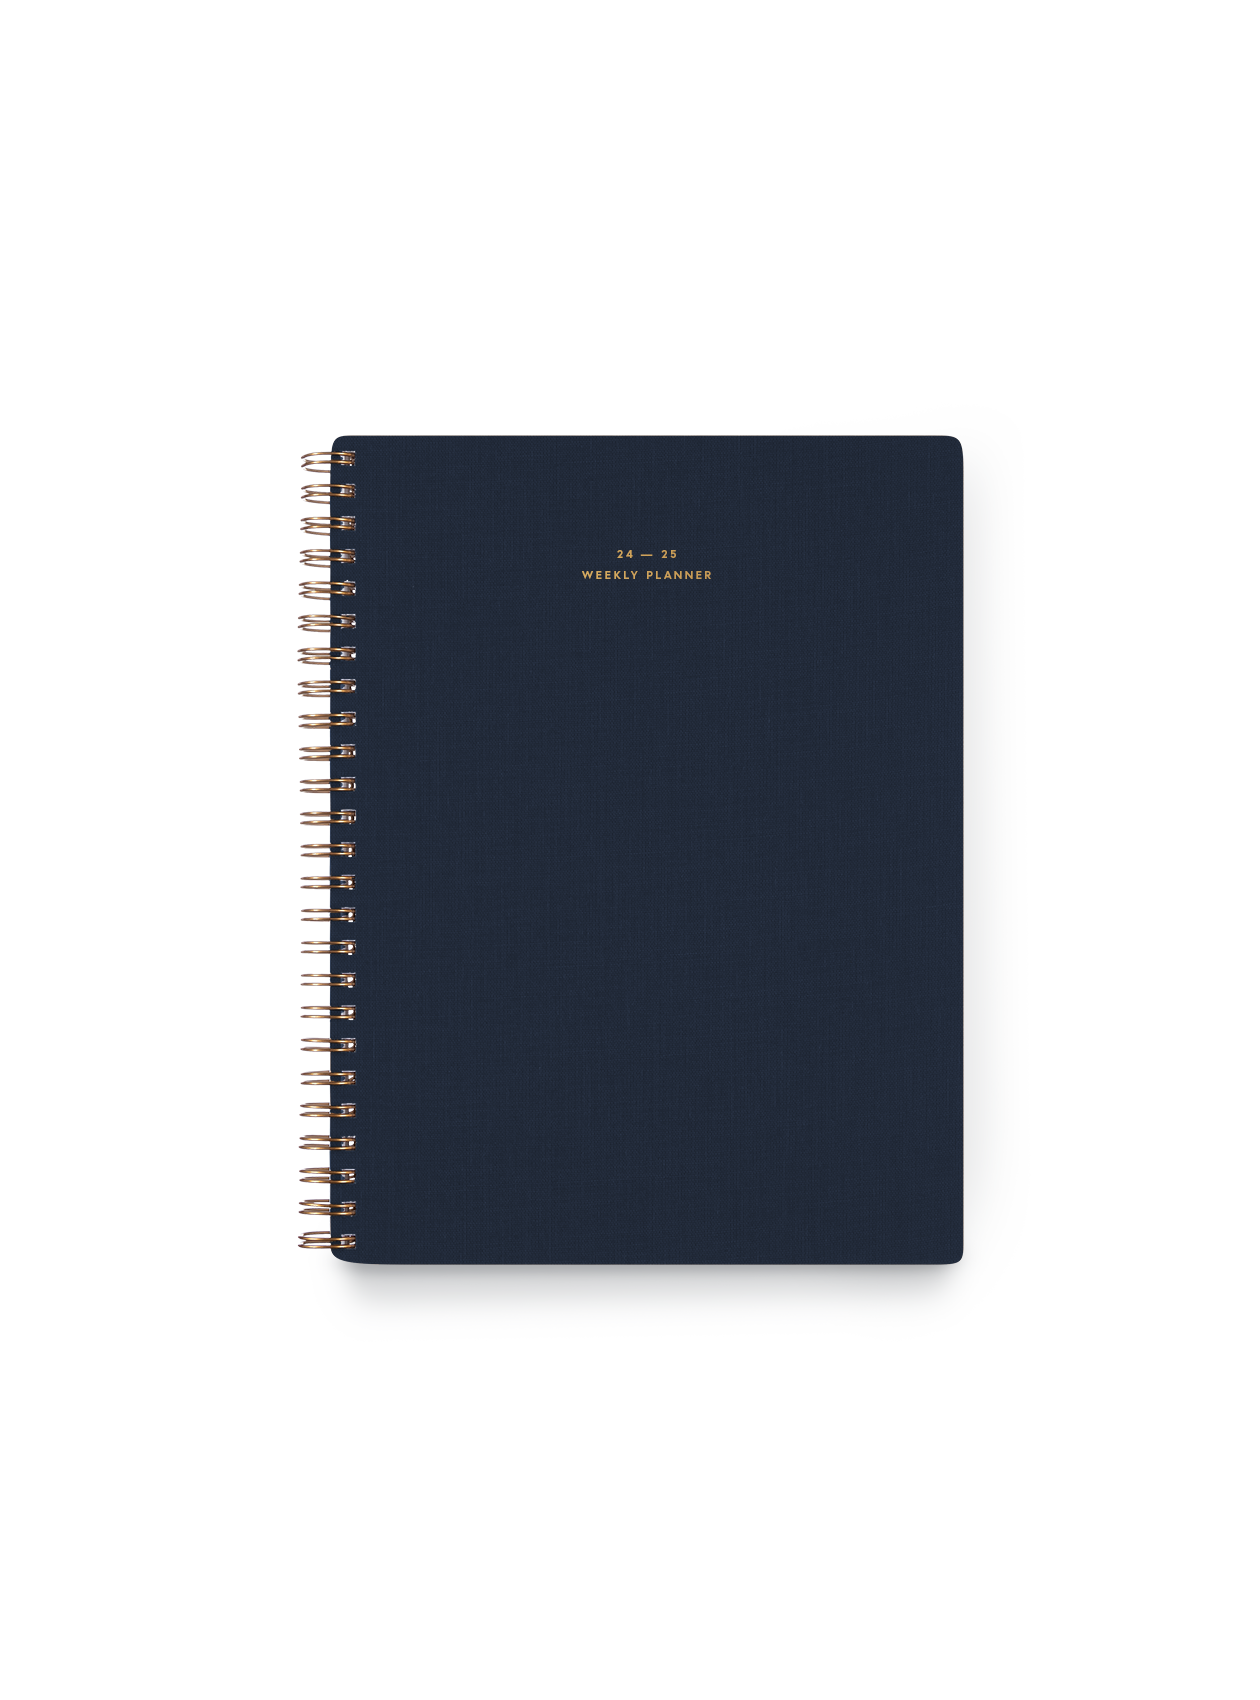 Appointed Weekly Grid Planner with brass wire-o binding, foil stamped details, and durable water-resistant bookcloth || Oxford Blue